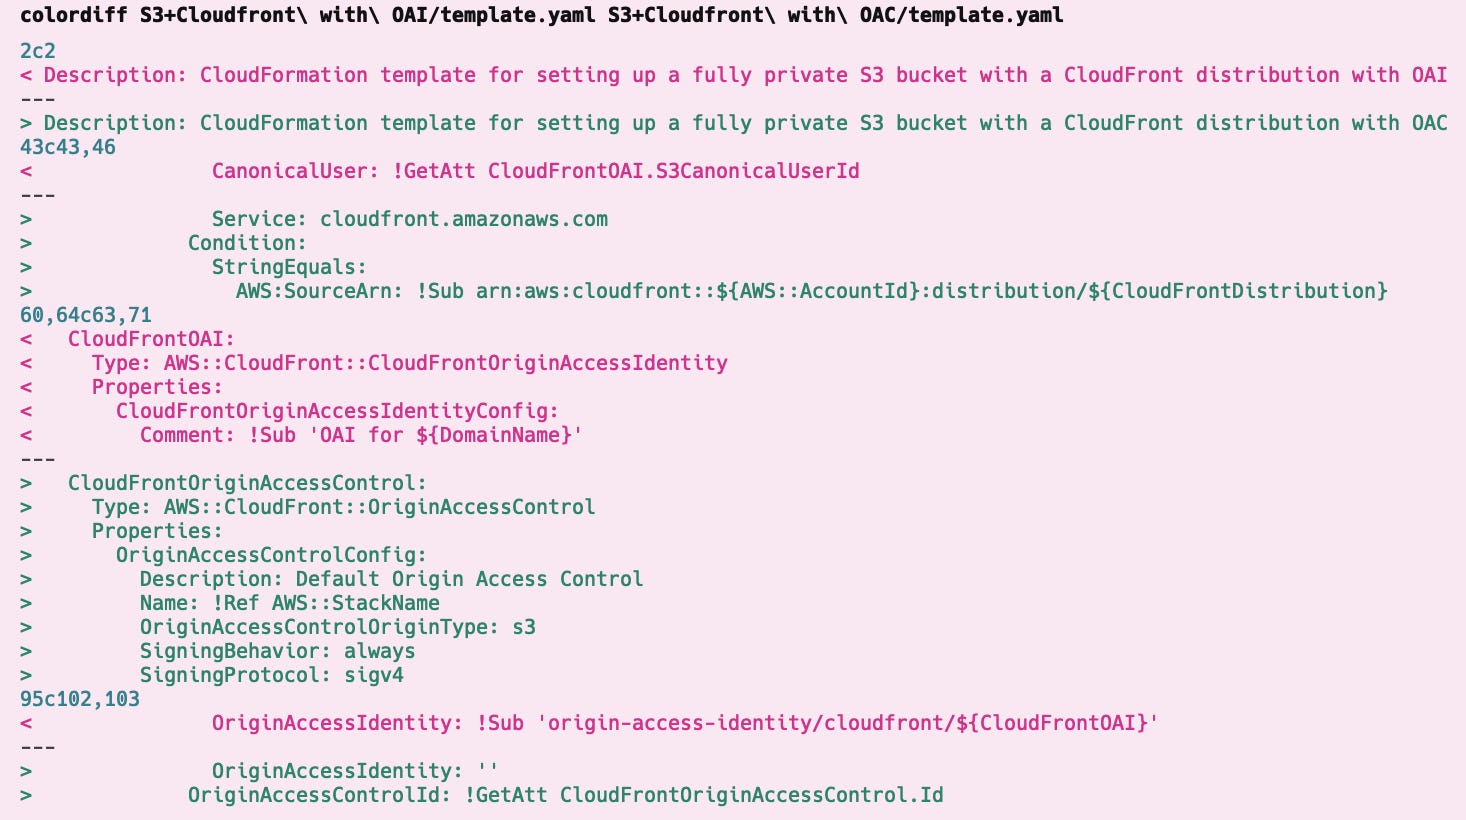 colordiff S3+Cloudfront\ with\ OAI/template.yaml S3+Cloudfront\ with\ OAC/template.yaml 2c2 < Description: CloudFormation template for setting up a fully private S3 bucket with a CloudFront distribution with OAI --- > Description: CloudFormation template for setting up a fully private S3 bucket with a CloudFront distribution with OAC 43c43,46 <               CanonicalUser: !GetAtt CloudFrontOAI.S3CanonicalUserId --- >               Service: cloudfront.amazonaws.com >             Condition: >               StringEquals: >                 AWS:SourceArn: !Sub arn:aws:cloudfront::${AWS::AccountId}:distribution/${CloudFrontDistribution} 60,64c63,71 <   CloudFrontOAI: <     Type: AWS::CloudFront::CloudFrontOriginAccessIdentity <     Properties: <       CloudFrontOriginAccessIdentityConfig: <         Comment: !Sub 'OAI for ${DomainName}' --- >   CloudFrontOriginAccessControl: >     Type: AWS::CloudFront::OriginAccessControl >     Properties: >       OriginAccessControlConfig: >         Description: Default Origin Access Control >         Name: !Ref AWS::StackName >         OriginAccessControlOriginType: s3 >         SigningBehavior: always >         SigningProtocol: sigv4 95c102,103 <               OriginAccessIdentity: !Sub 'origin-access-identity/cloudfront/${CloudFrontOAI}' --- >               OriginAccessIdentity: '' >             OriginAccessControlId: !GetAtt CloudFrontOriginAccessControl.Id